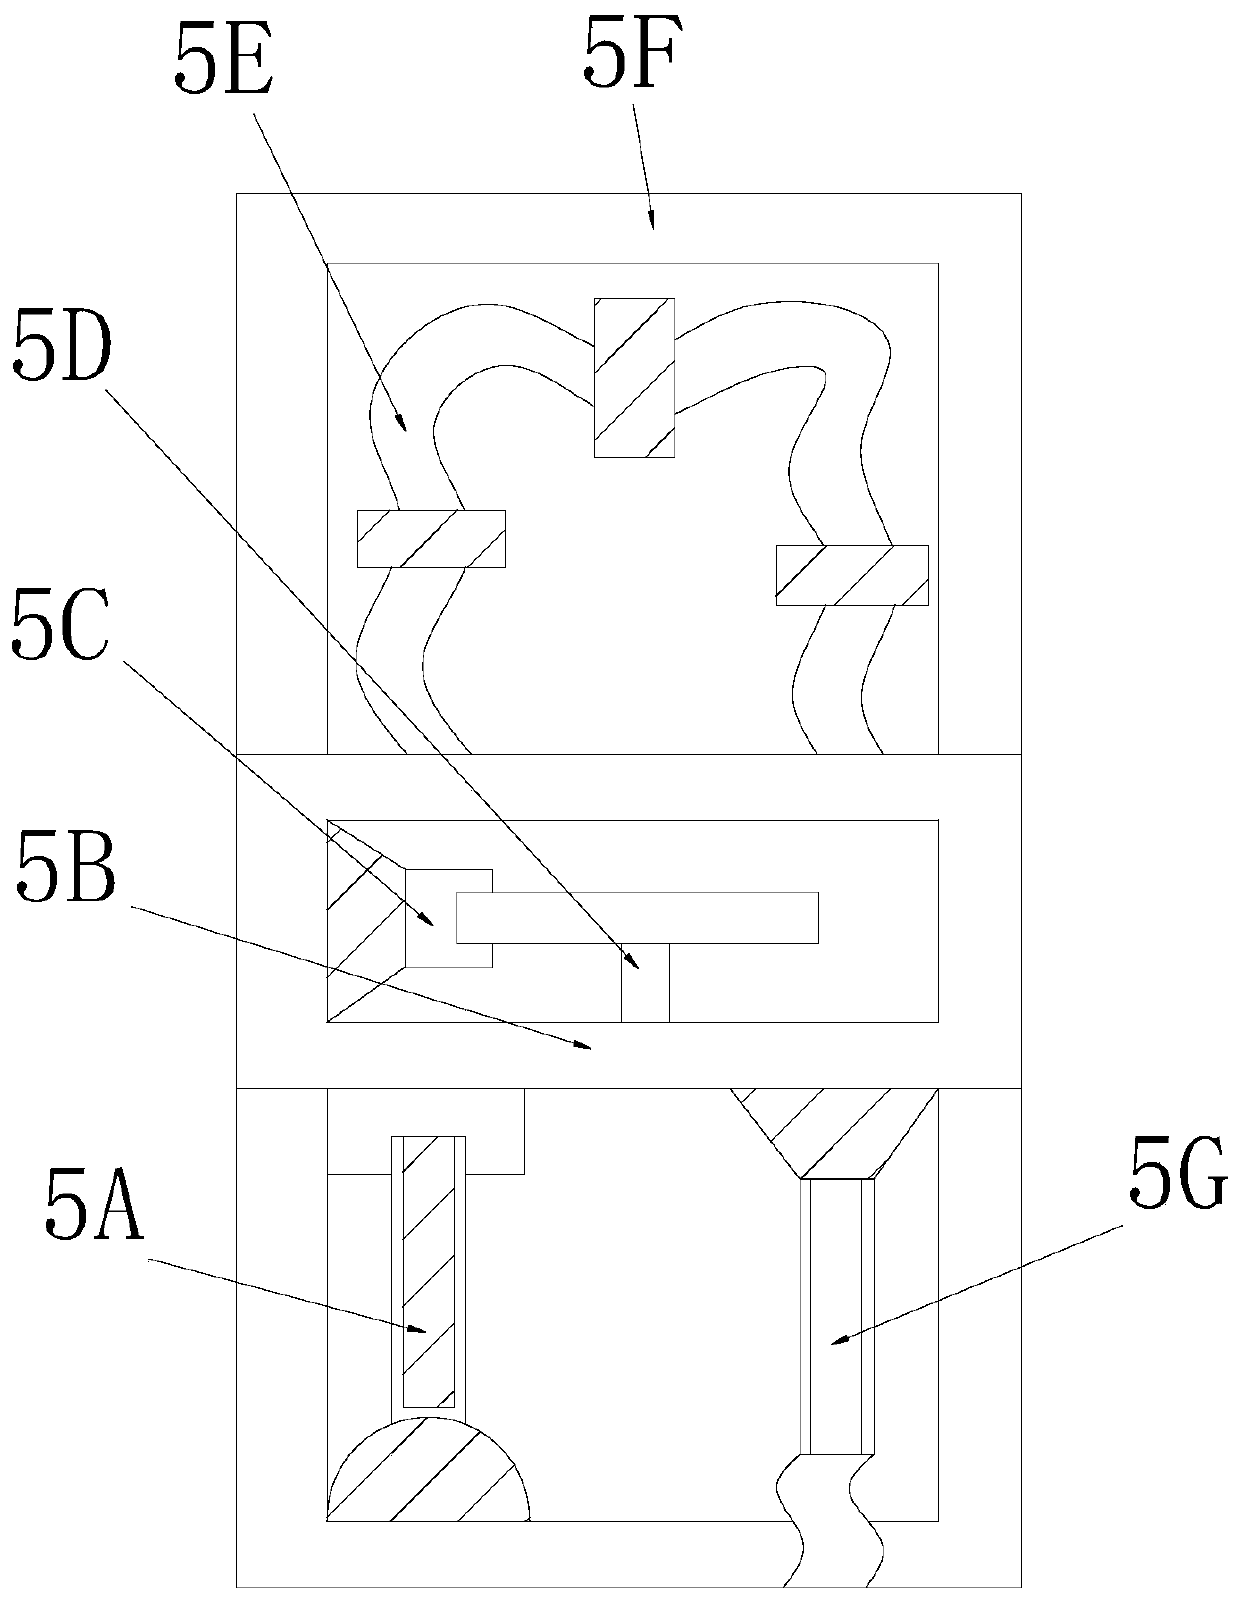 Gas control device for retention ring attenuation based on radioactive inert gas